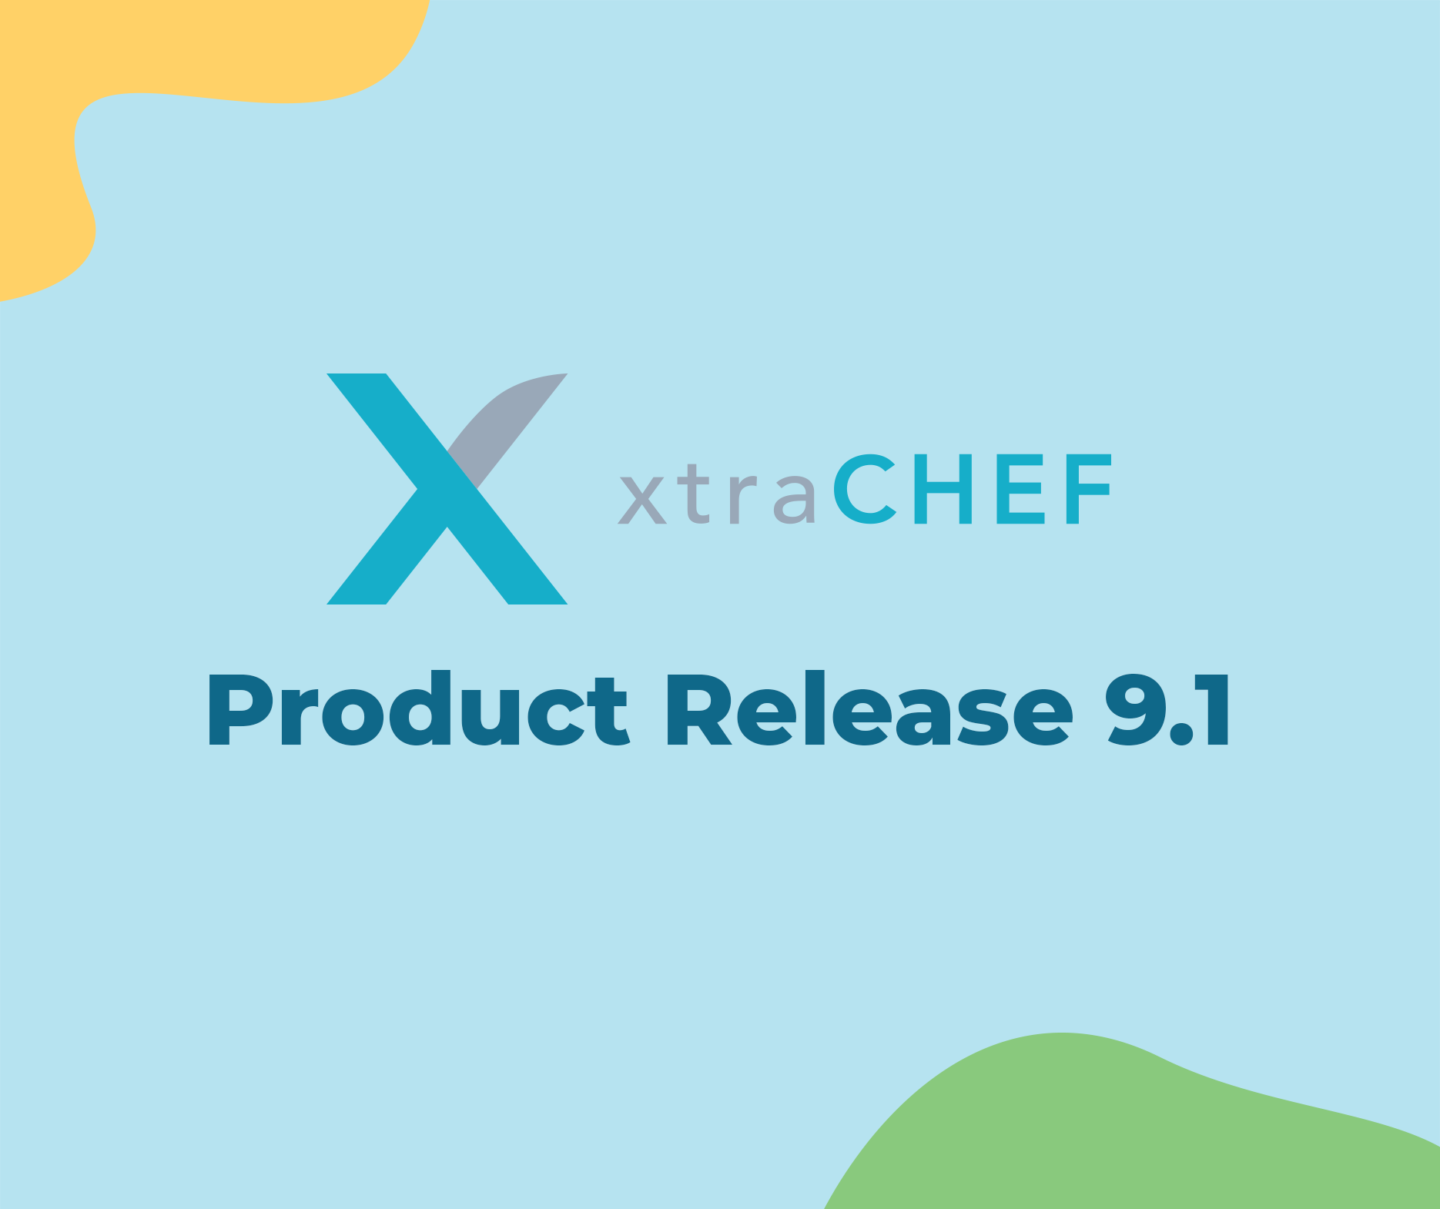 xtrachef product release